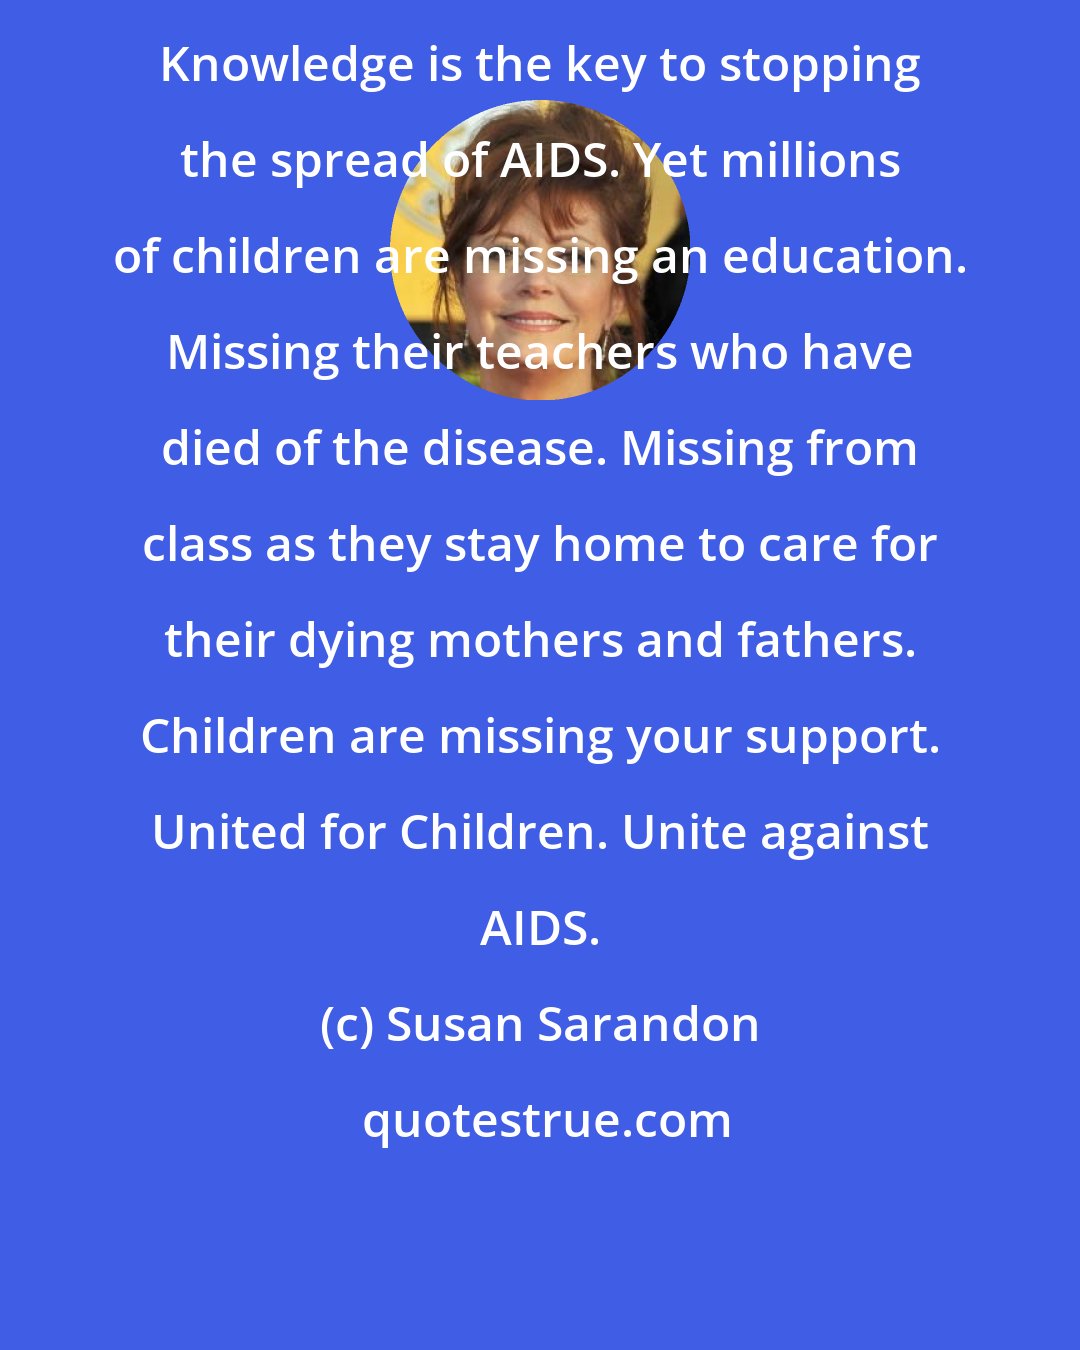 Susan Sarandon: Knowledge is the key to stopping the spread of AIDS. Yet millions of children are missing an education. Missing their teachers who have died of the disease. Missing from class as they stay home to care for their dying mothers and fathers. Children are missing your support. United for Children. Unite against AIDS.